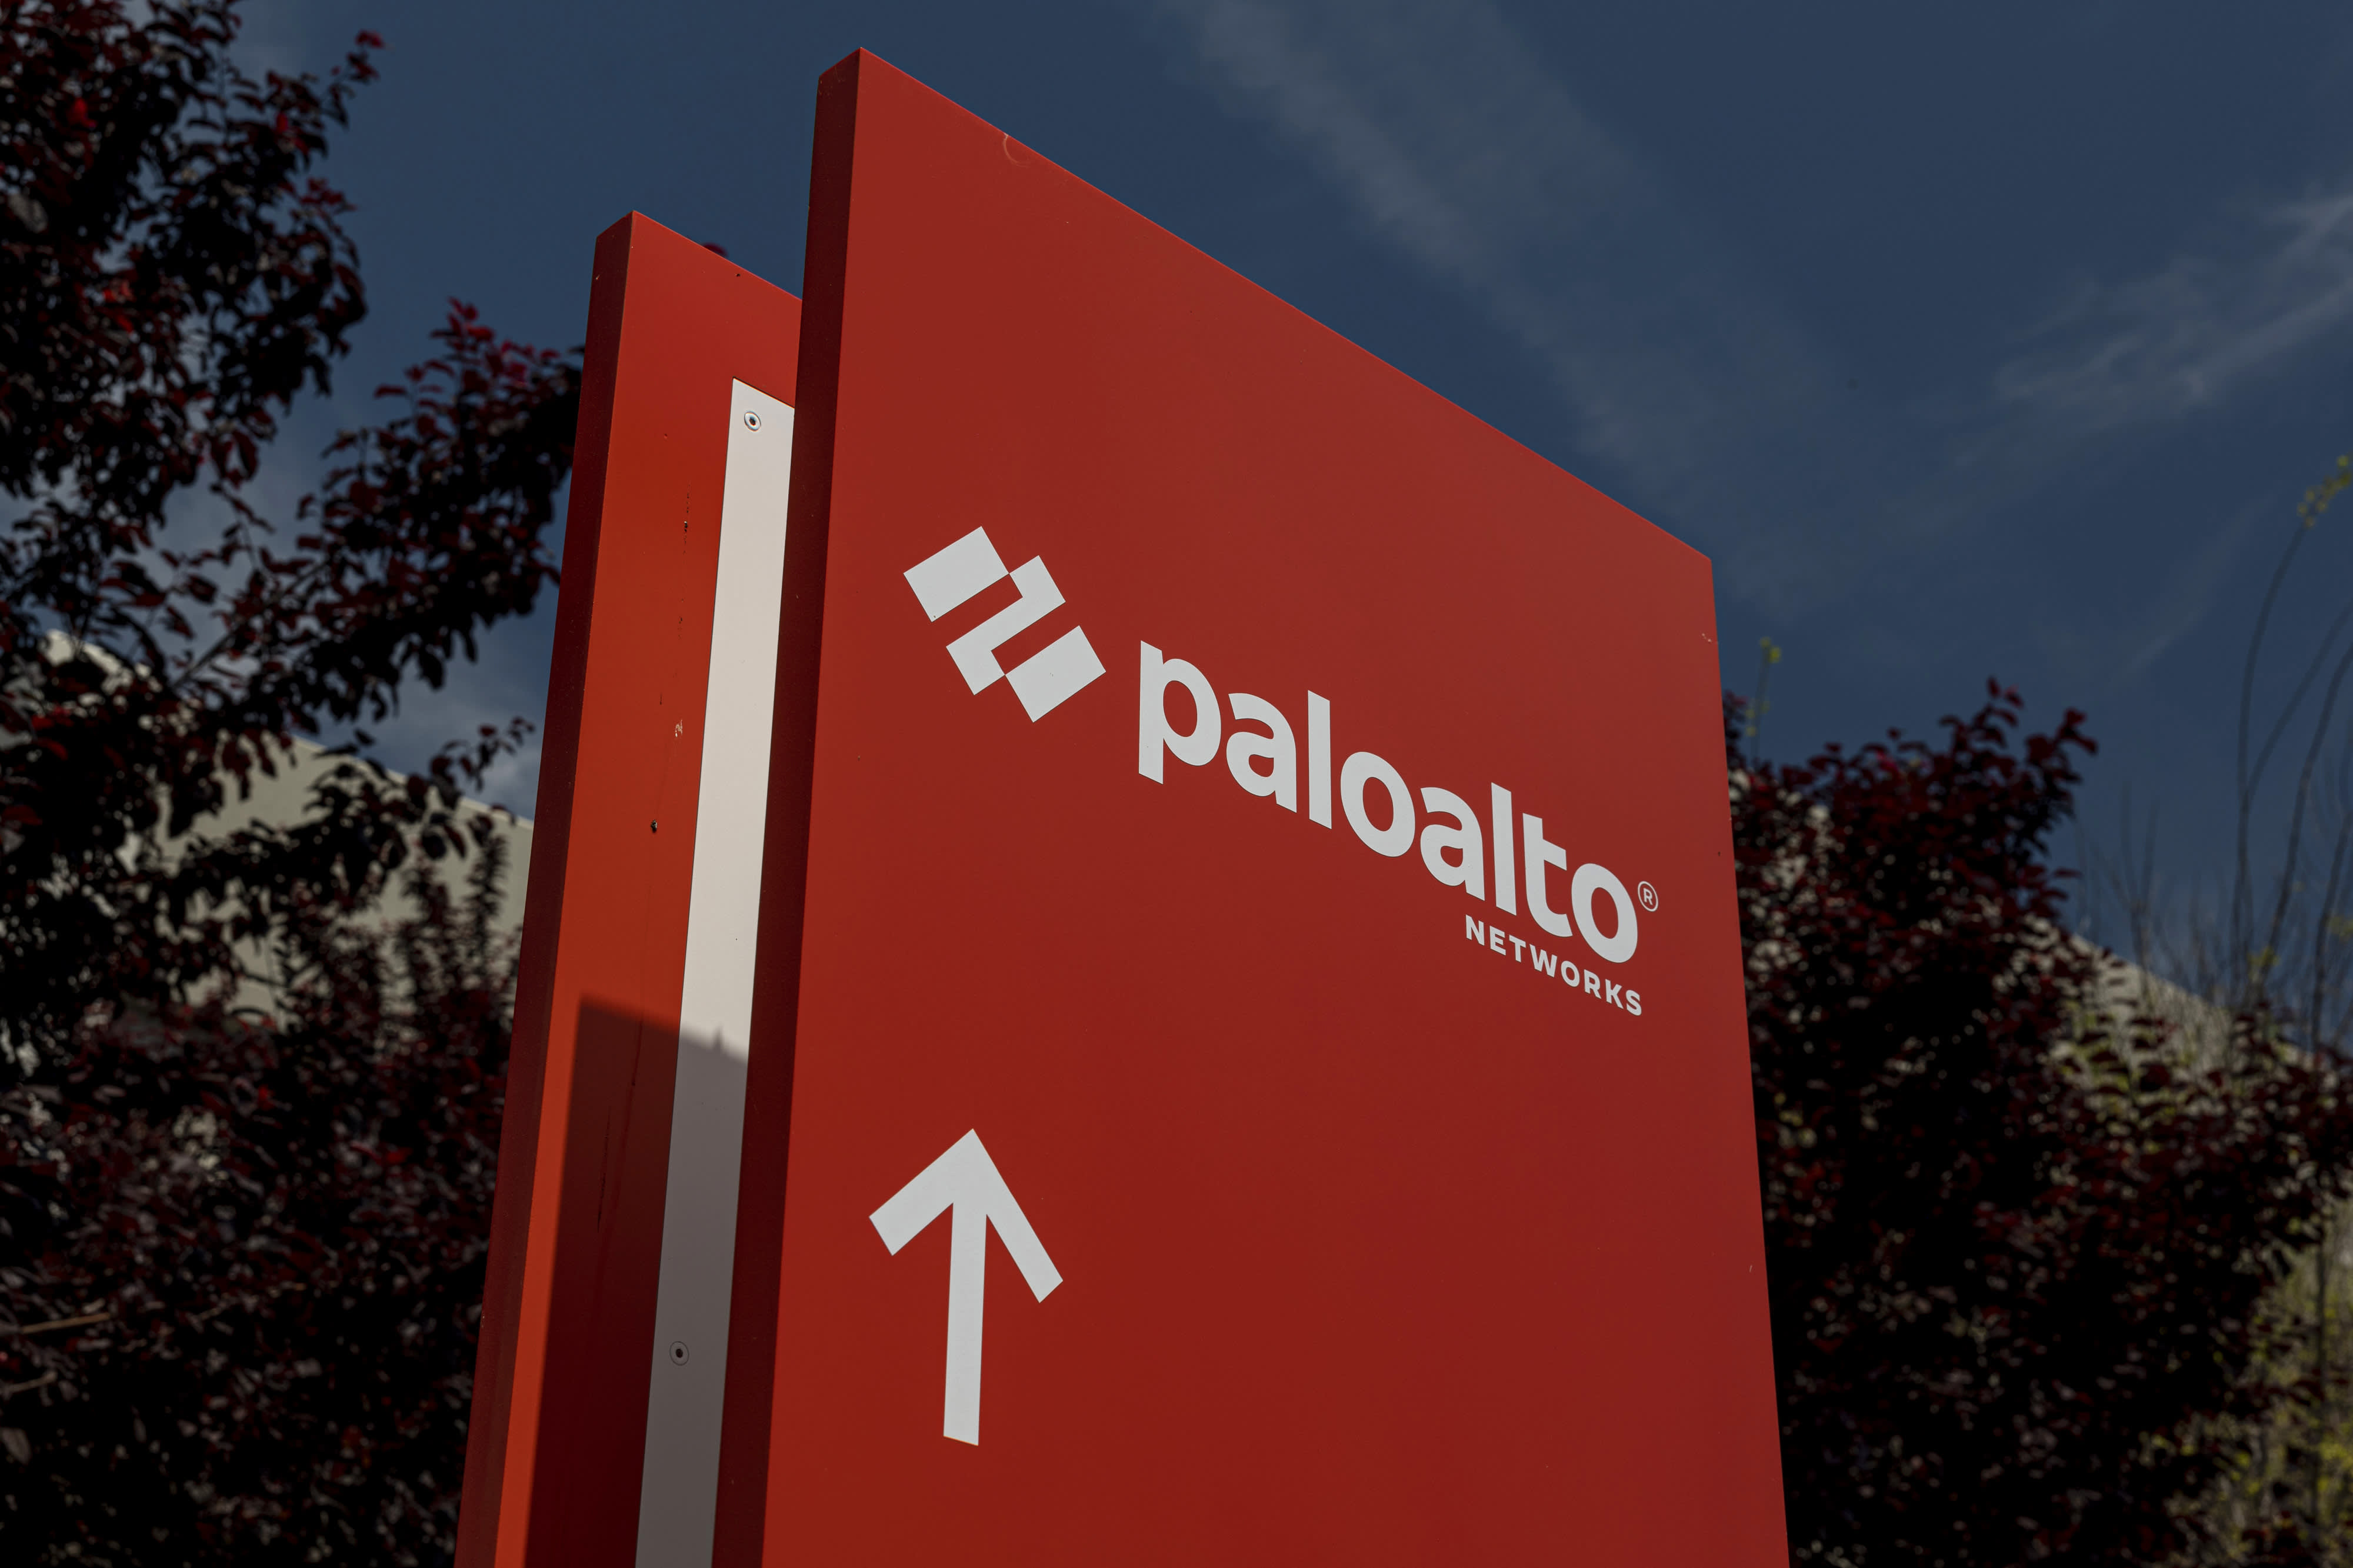 Stocks making the biggest moves after hours: Palo Alto Networks, Virgin Galactic & more